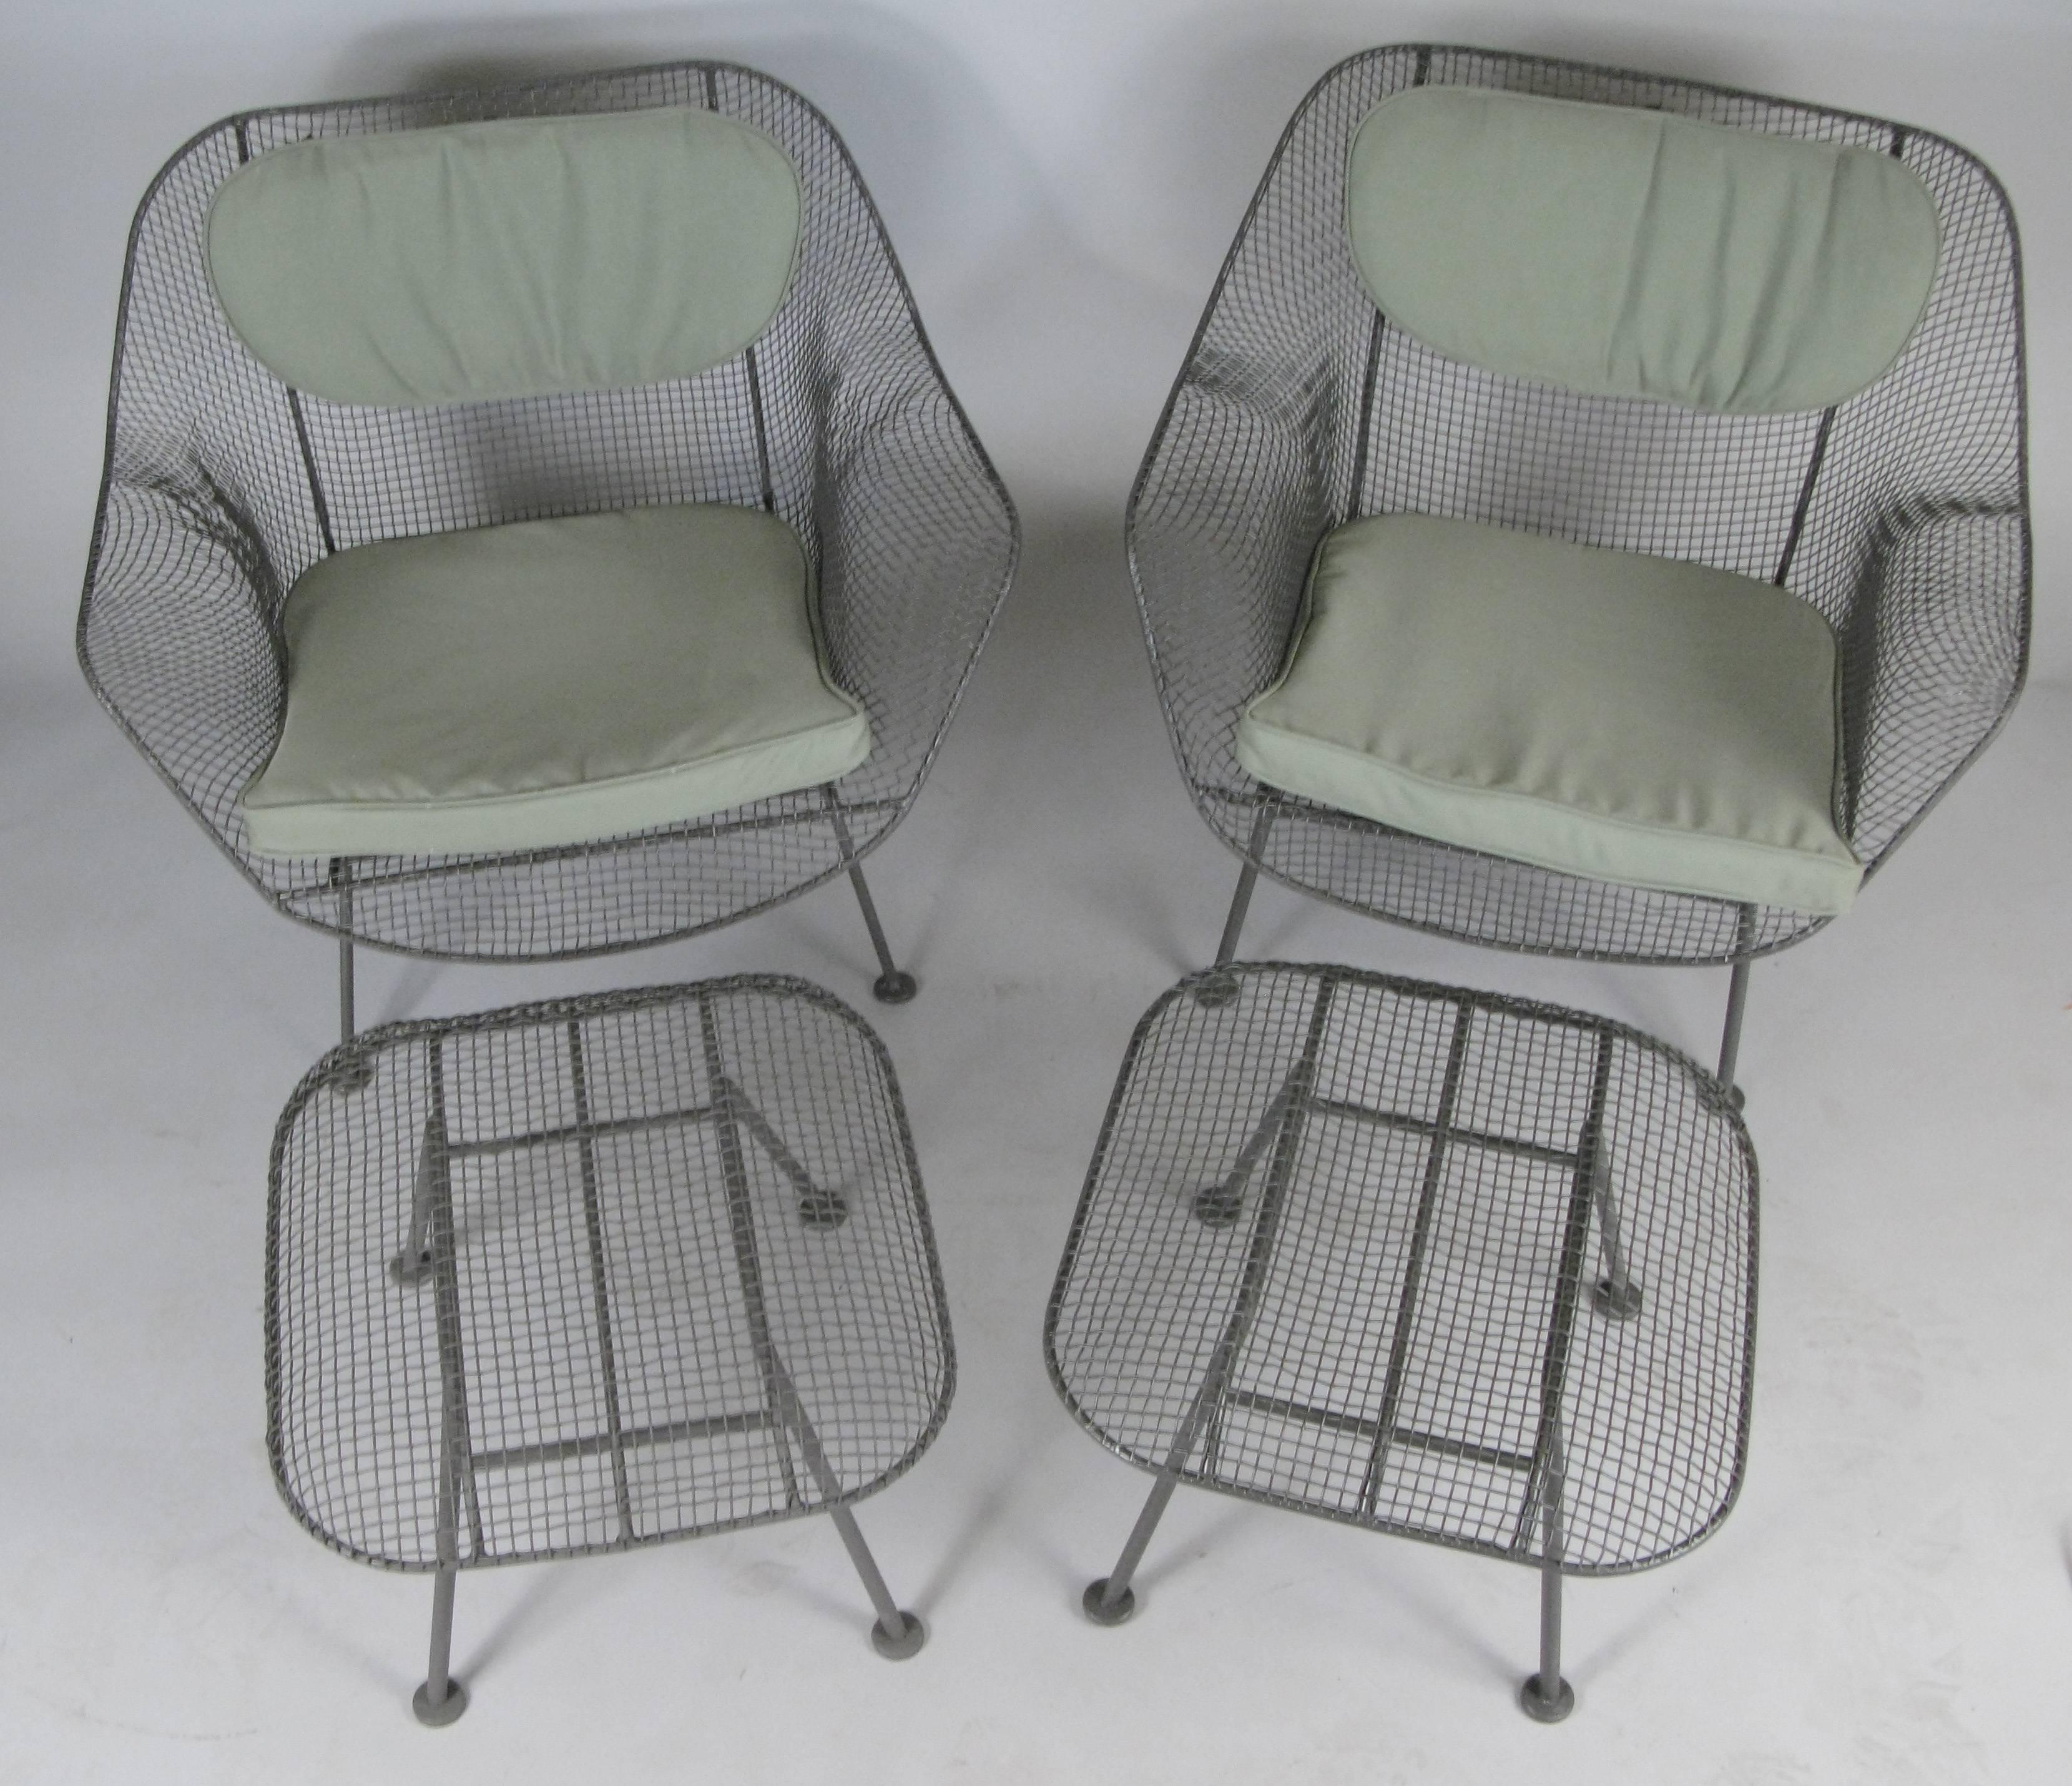 A pair of 'Sculptura' collection garden lounge chairs and matching ottomans all designed by Russell Woodard and made in the 1950s. Woodard's Sculptura collection was made with wrought iron frames and woven steel mesh seats. These are the largest